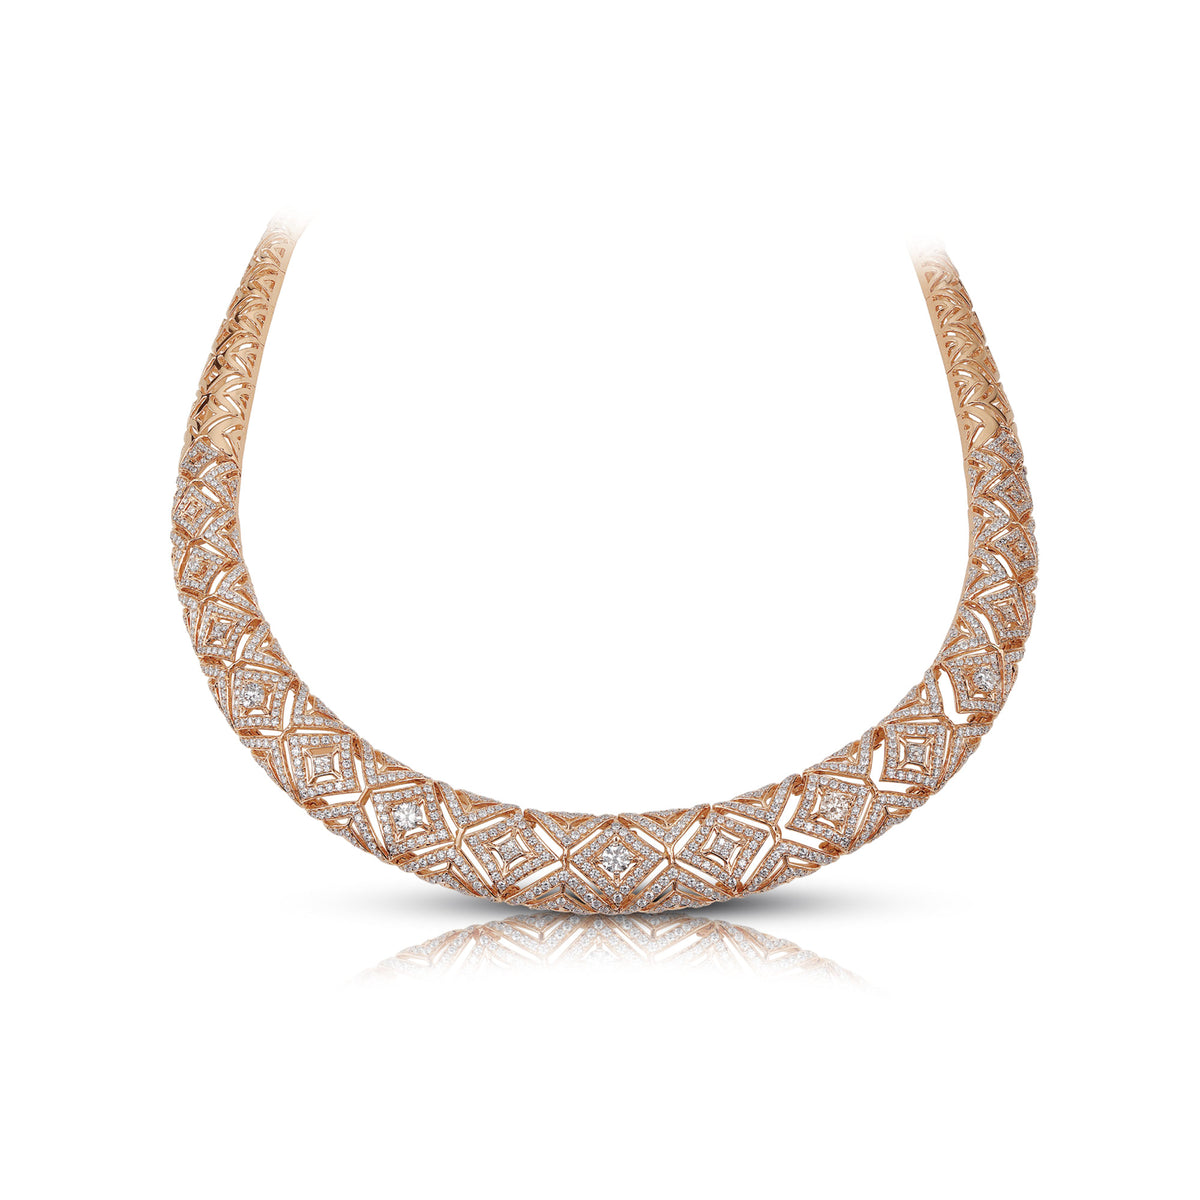 Antik Damgaard-Lauritsen - An art deco diamond necklace mounted in 14k gold  and white gold